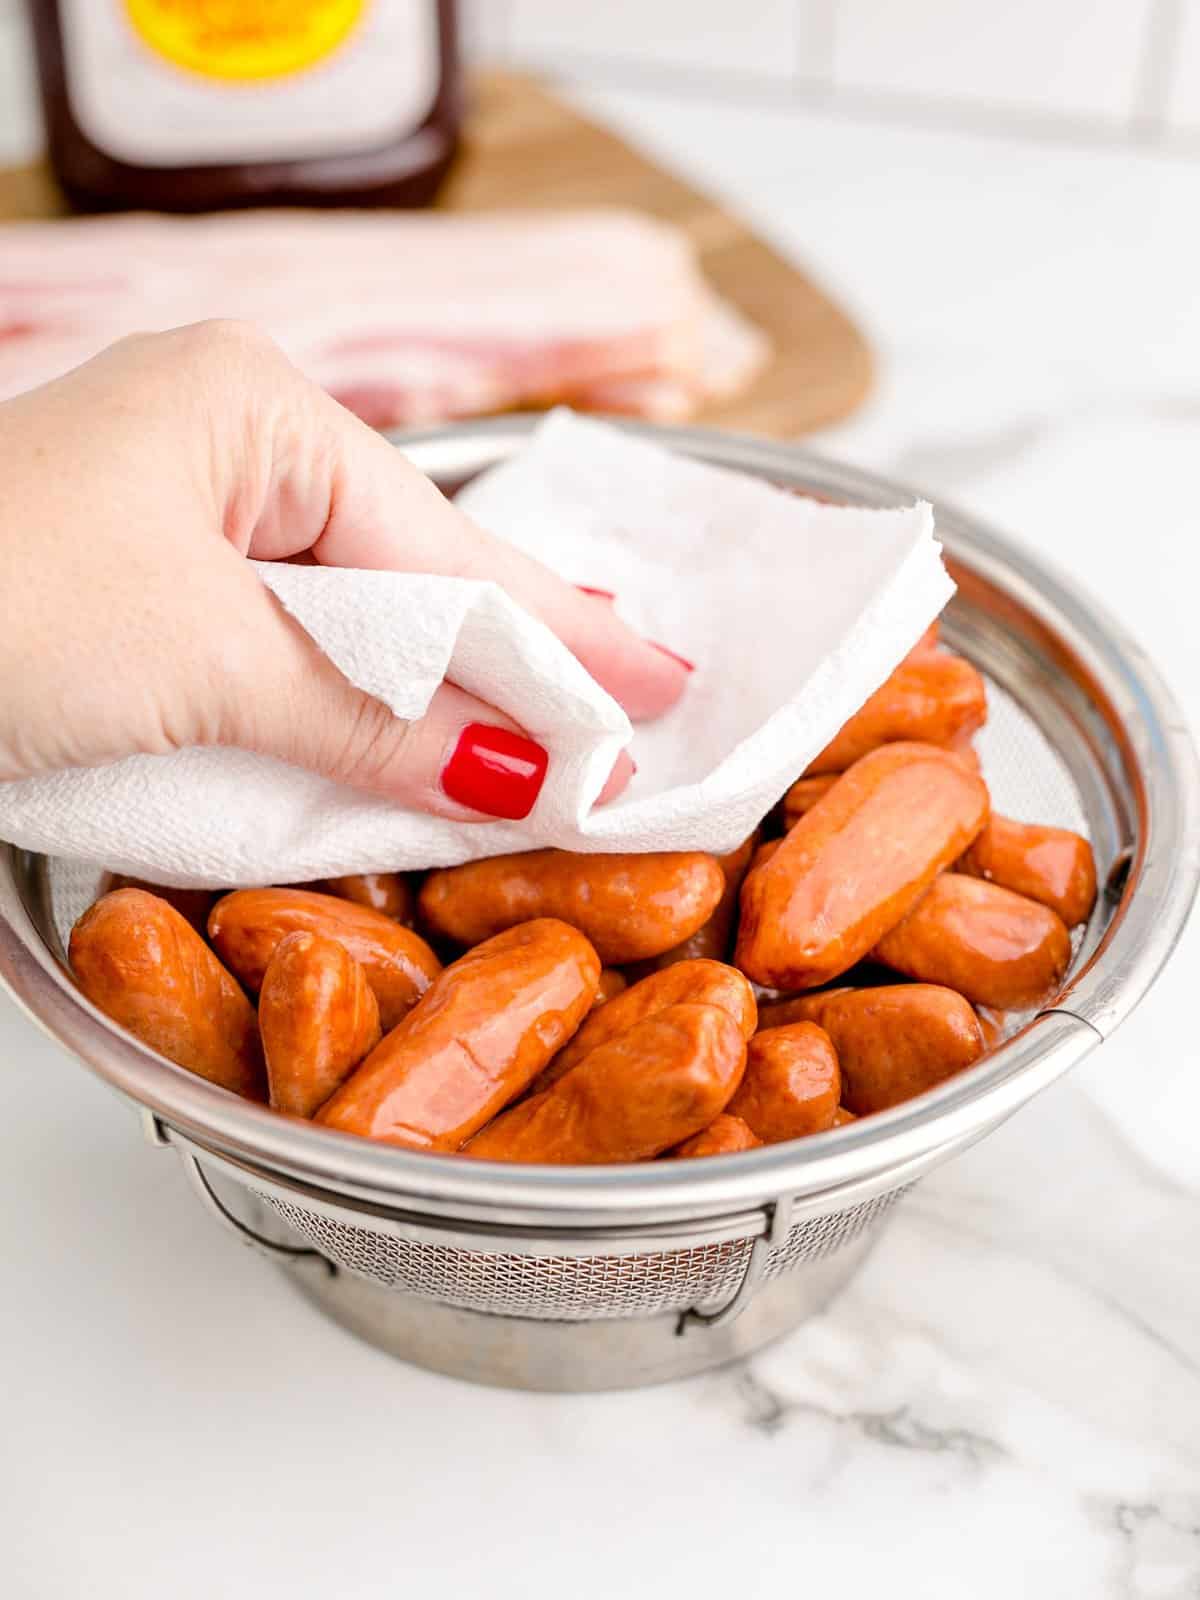 patting cocktail sausages dry with a paper towel.